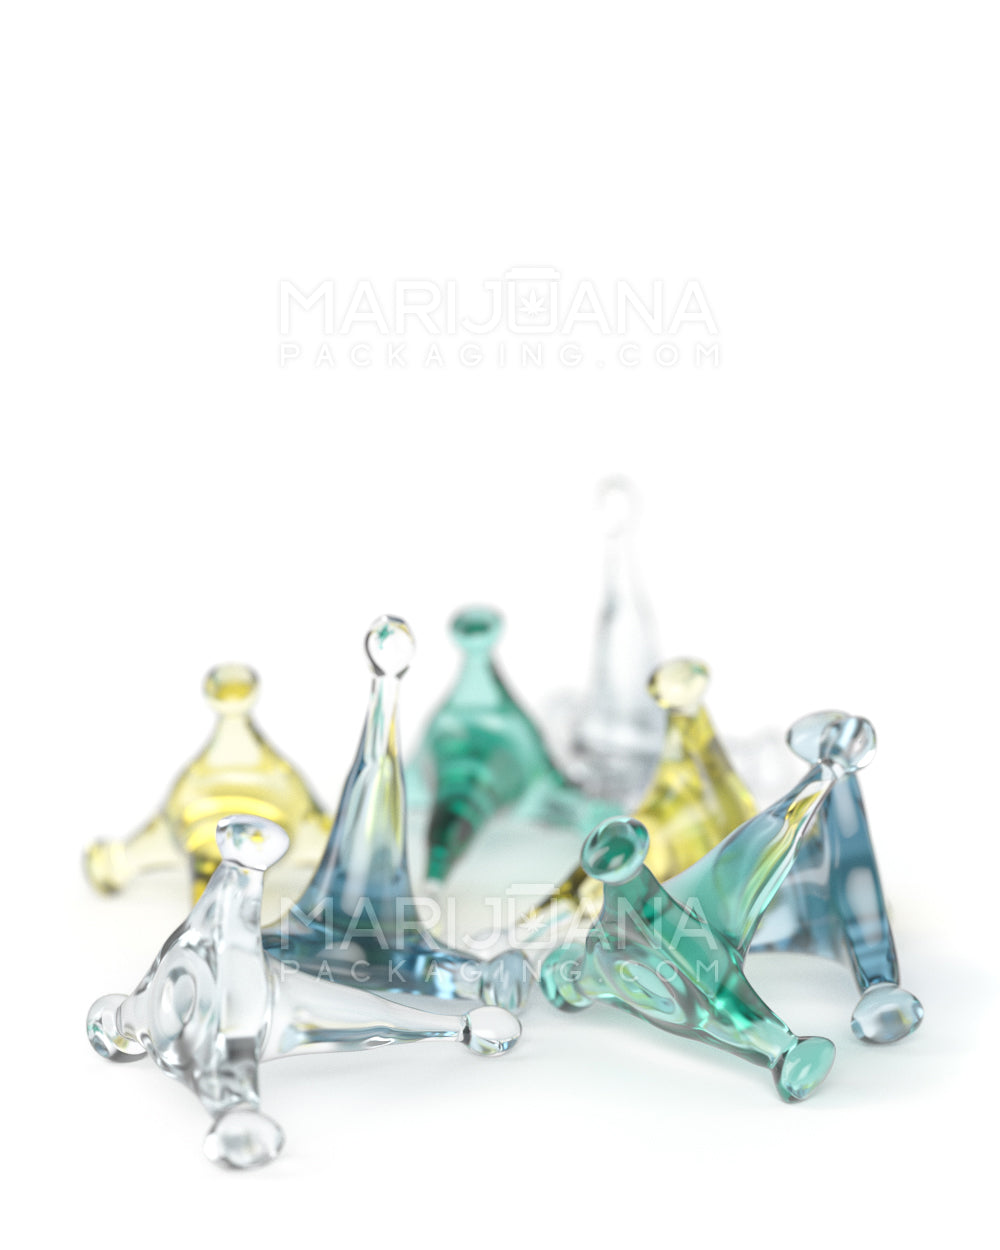 Glass Pipe Screens: Glass Screens for Bongs & Pipe Bowls